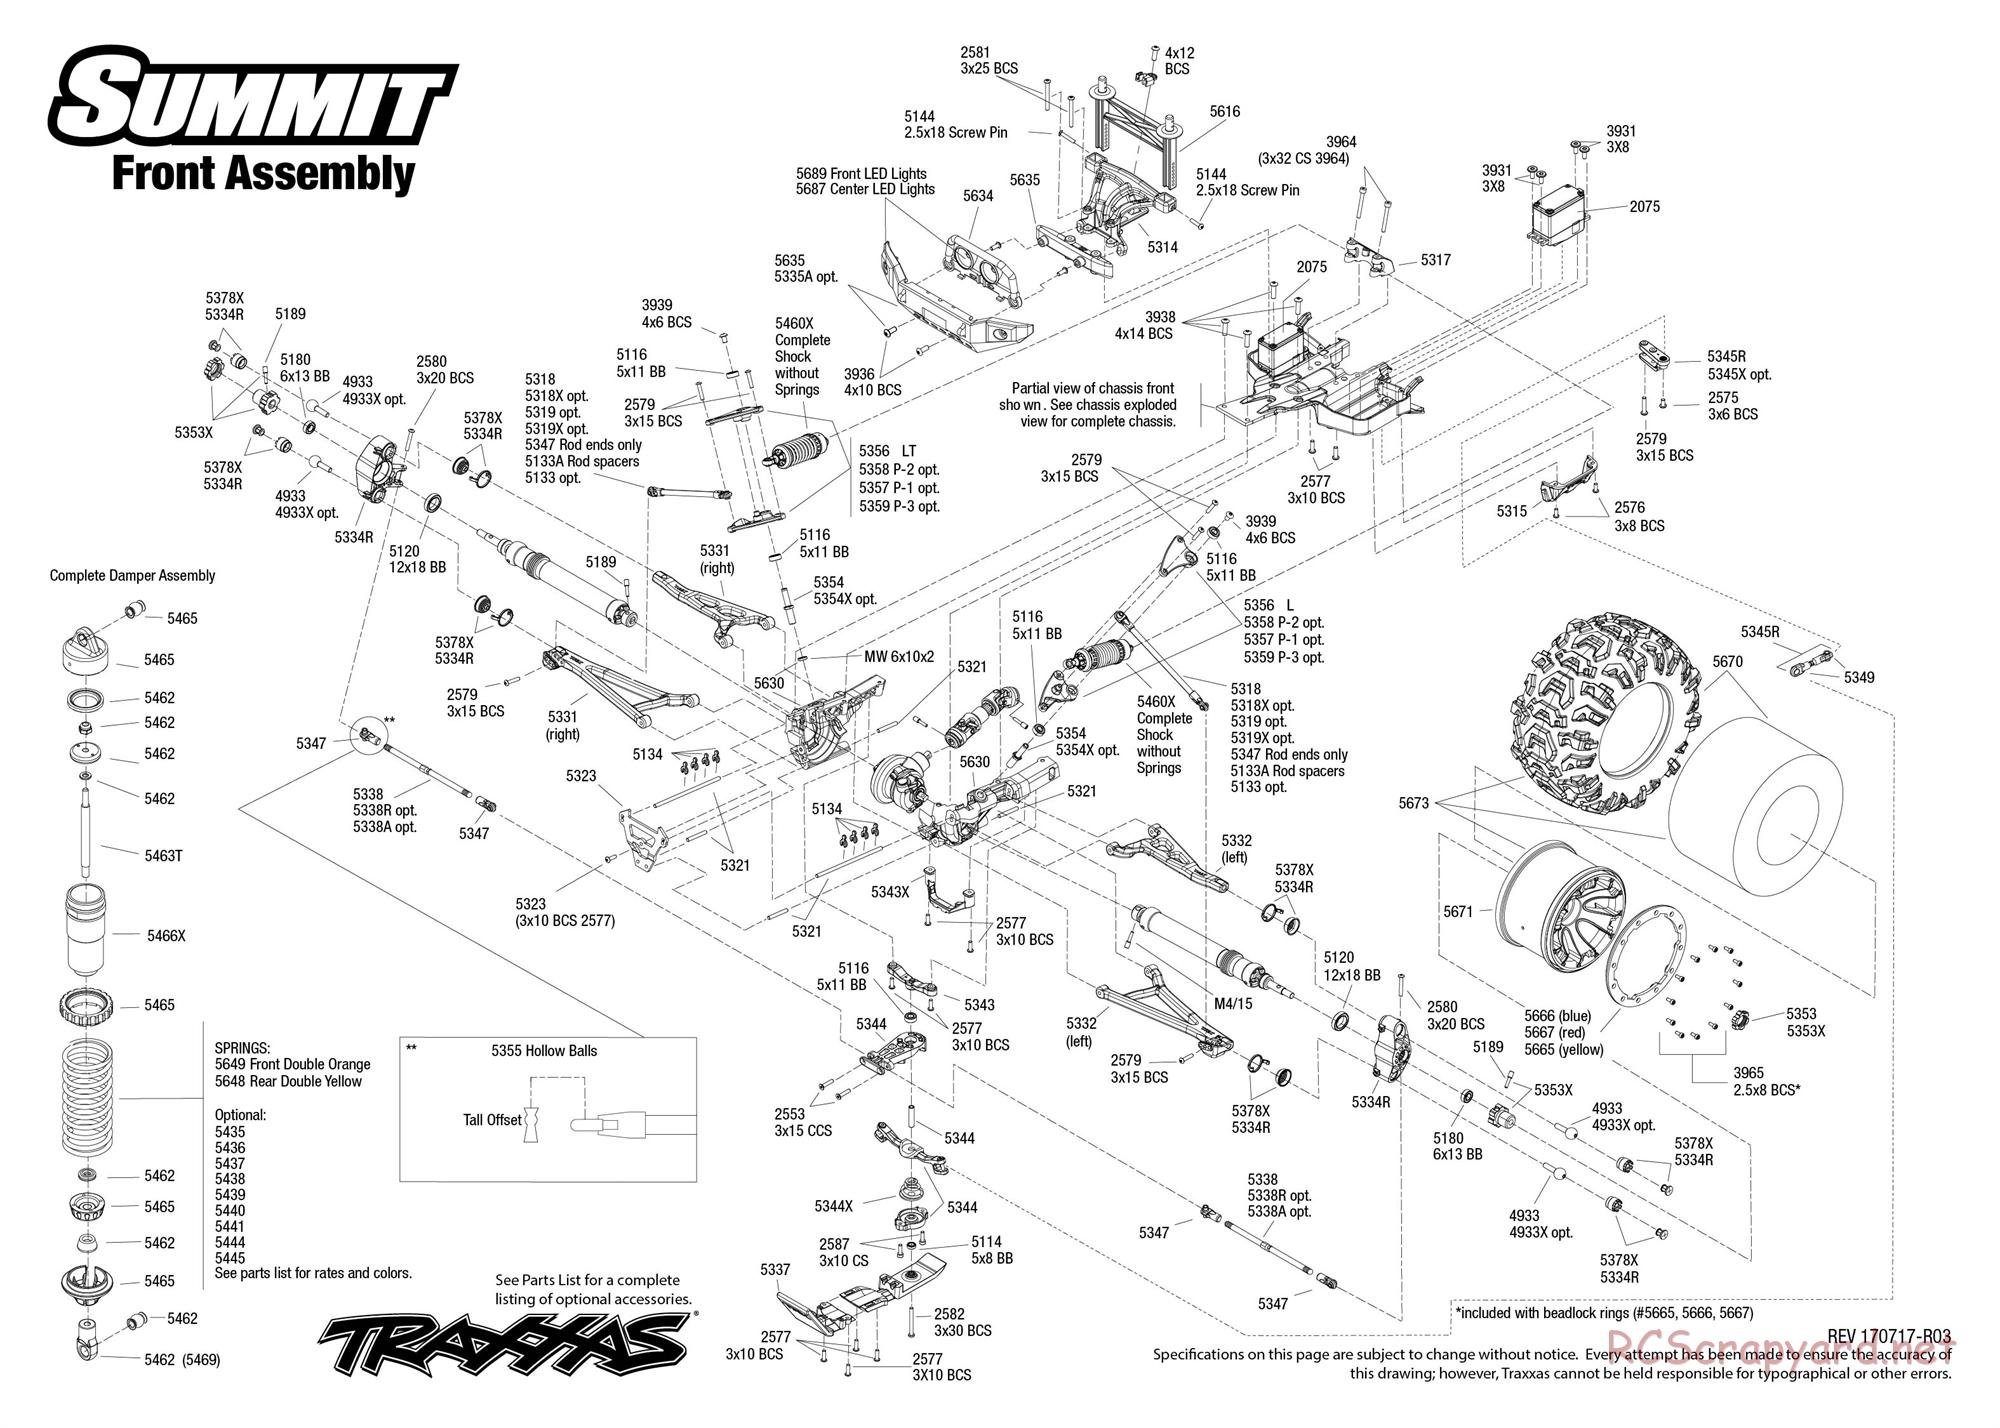 Traxxas - Summit (2015) - Exploded Views - Page 3